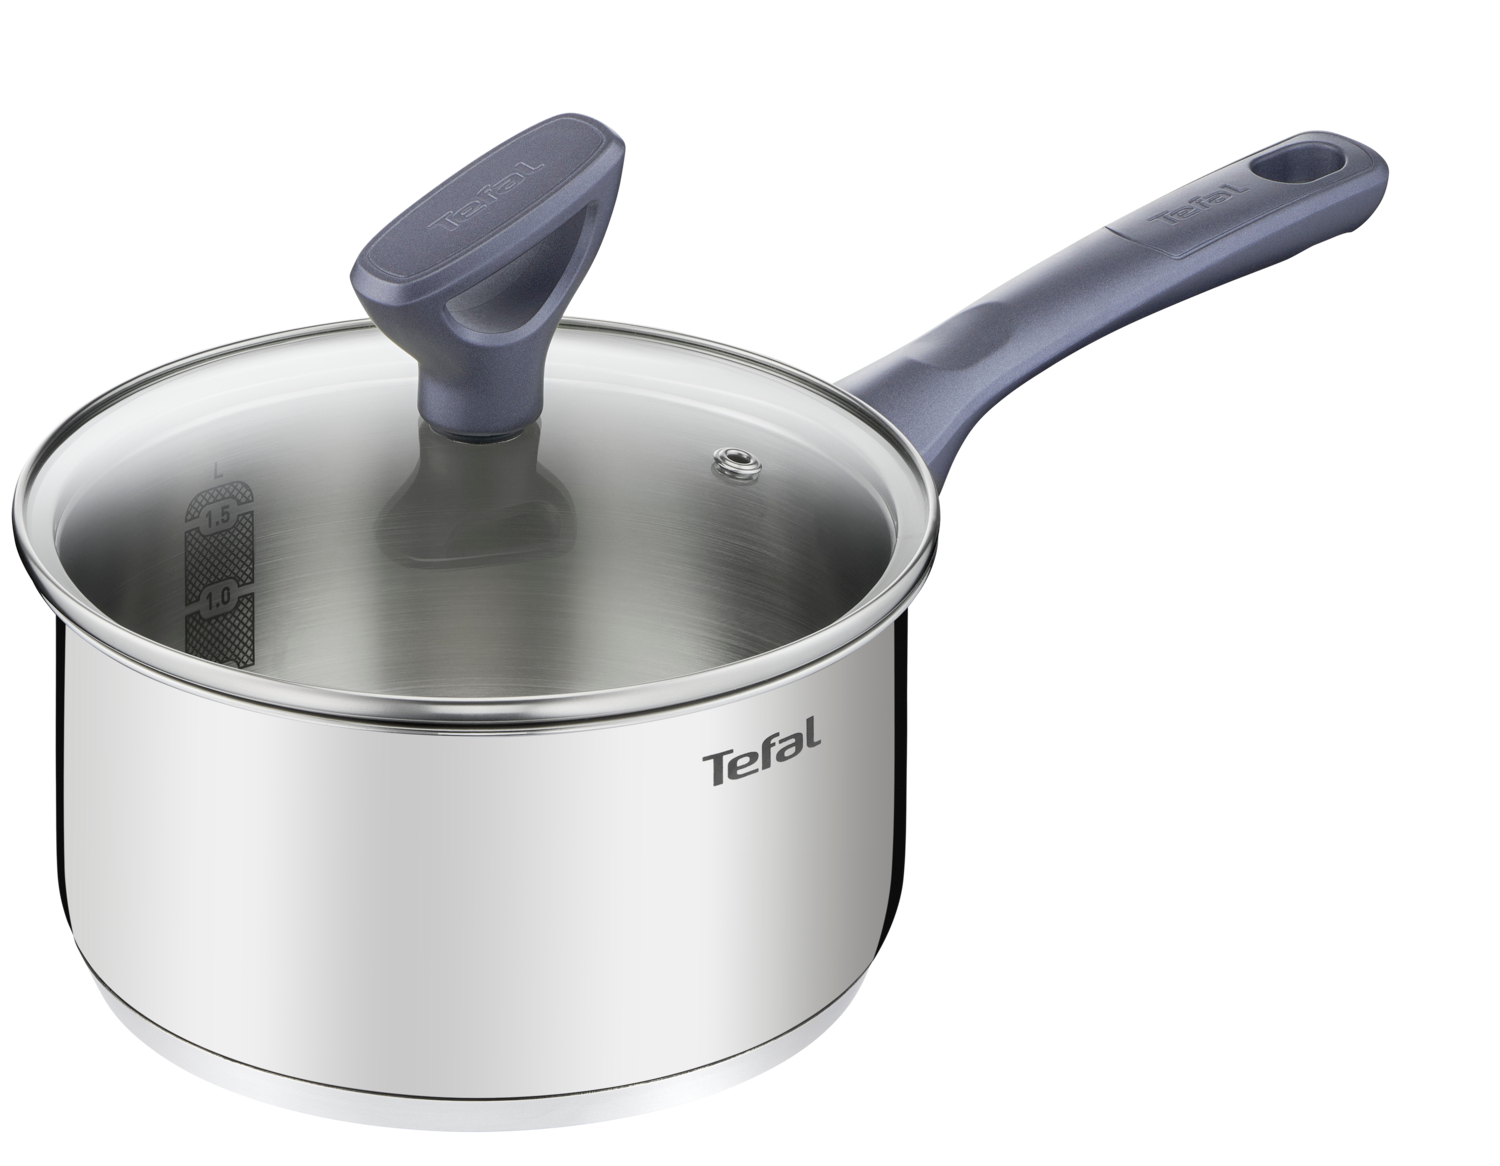 Tefal daily cook. Ковши Tefal Daily Cook. Tefal Daily Cook g7130514. Tefal Daily Cook g7130614. Ковш Tefal Intuition 1,3 л.